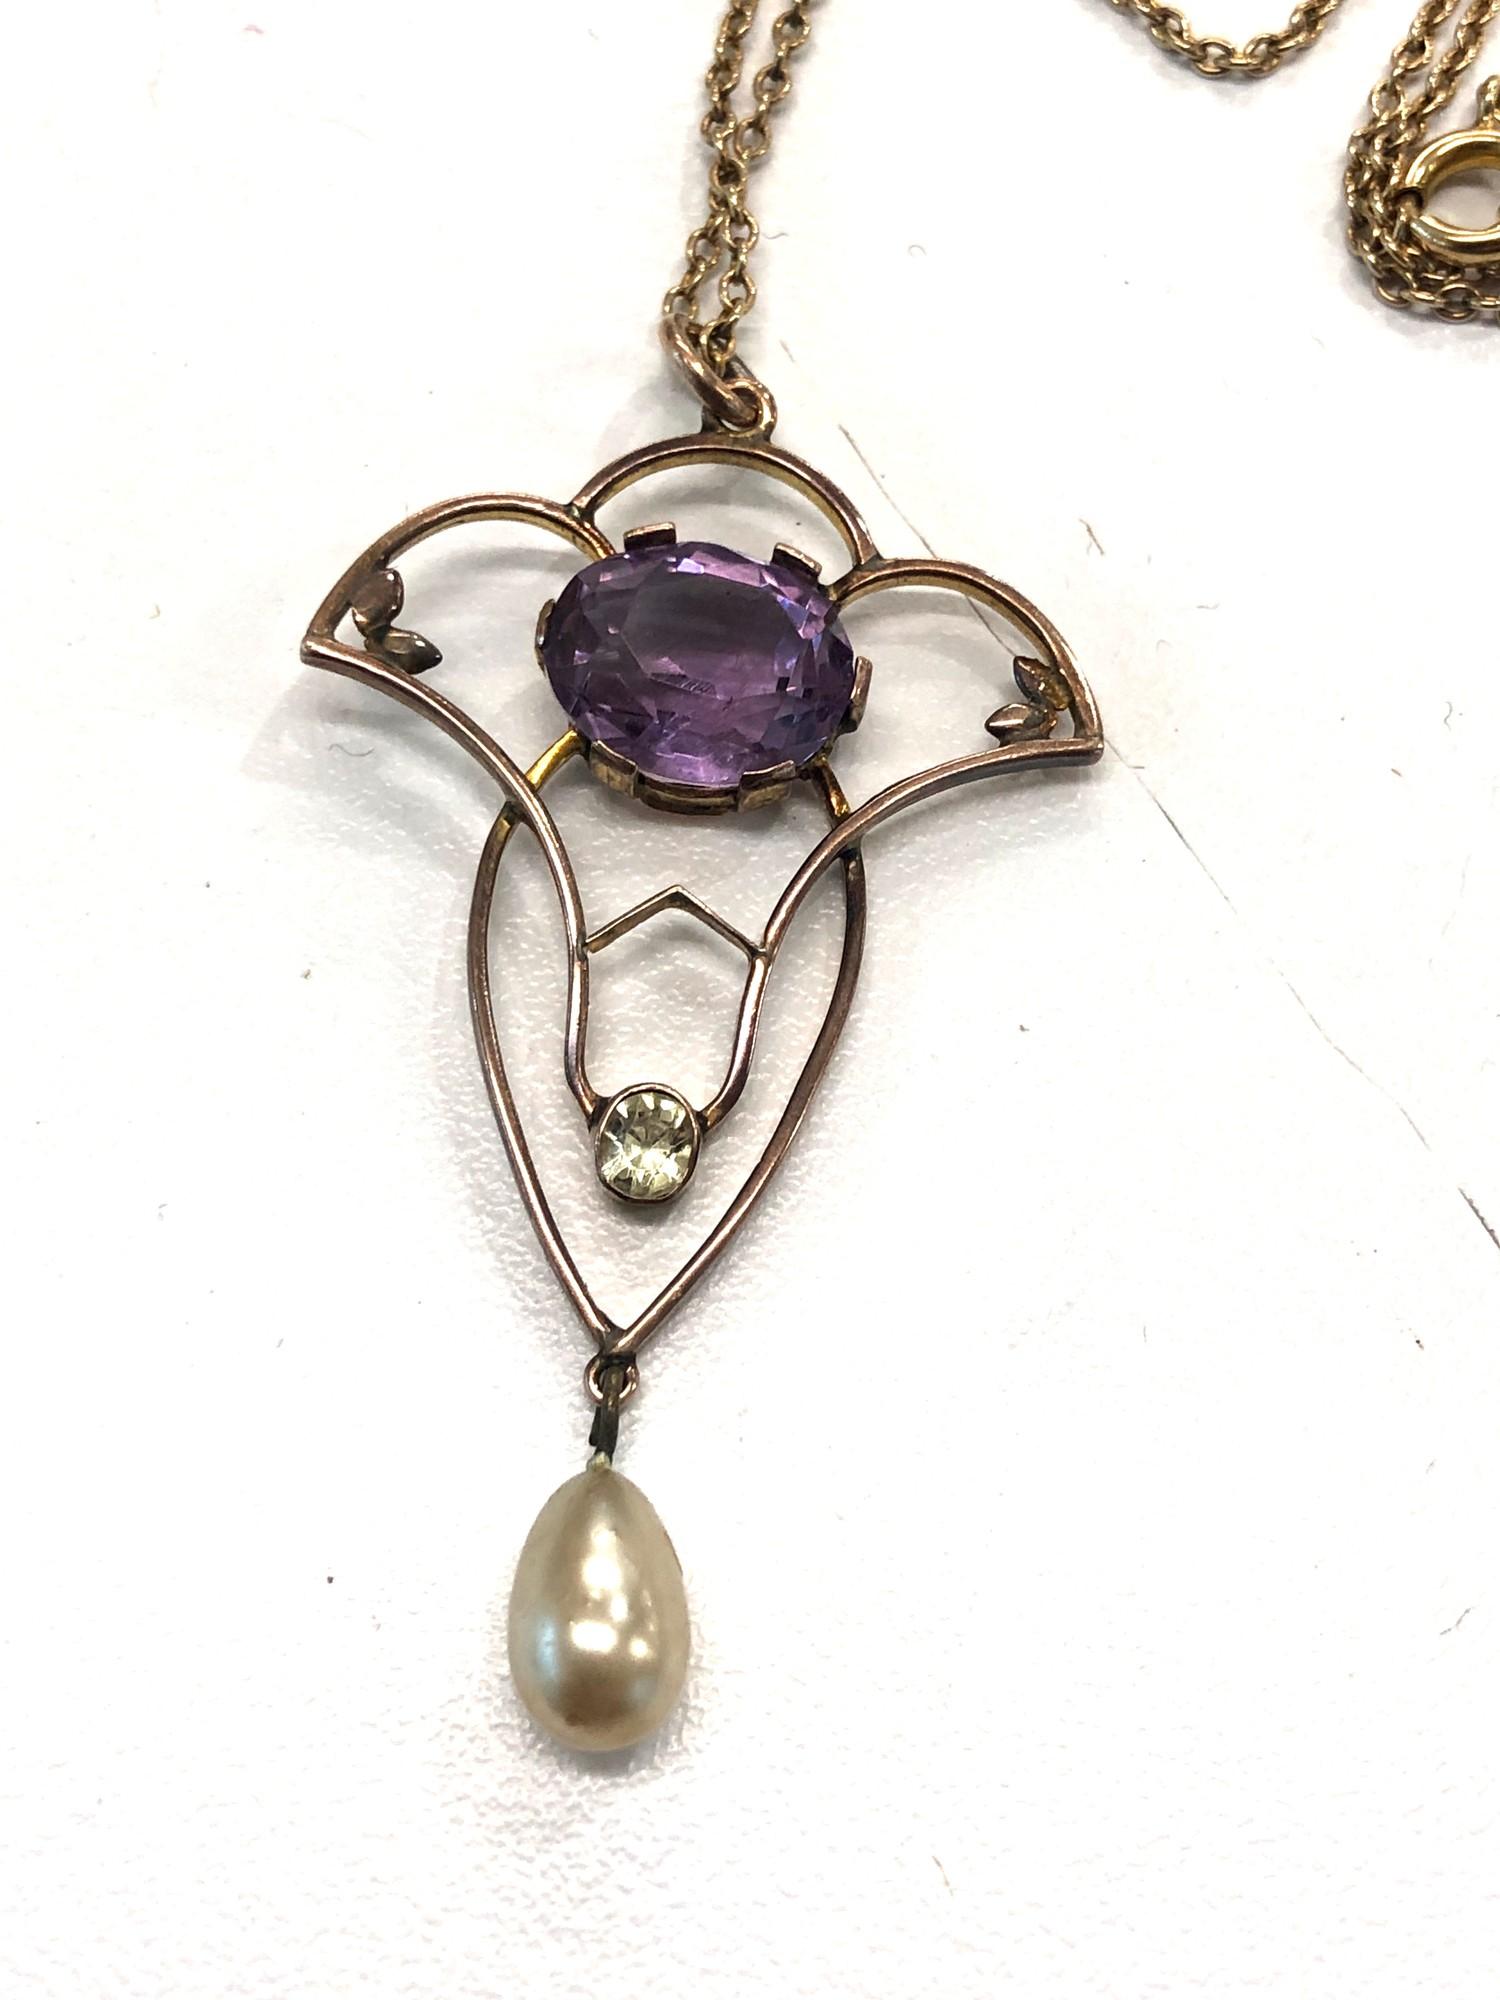 Antique 9ct gold amethyst and pearl drop pendant and chain pendant measures approx 4.6cm drop by 2. - Image 2 of 3